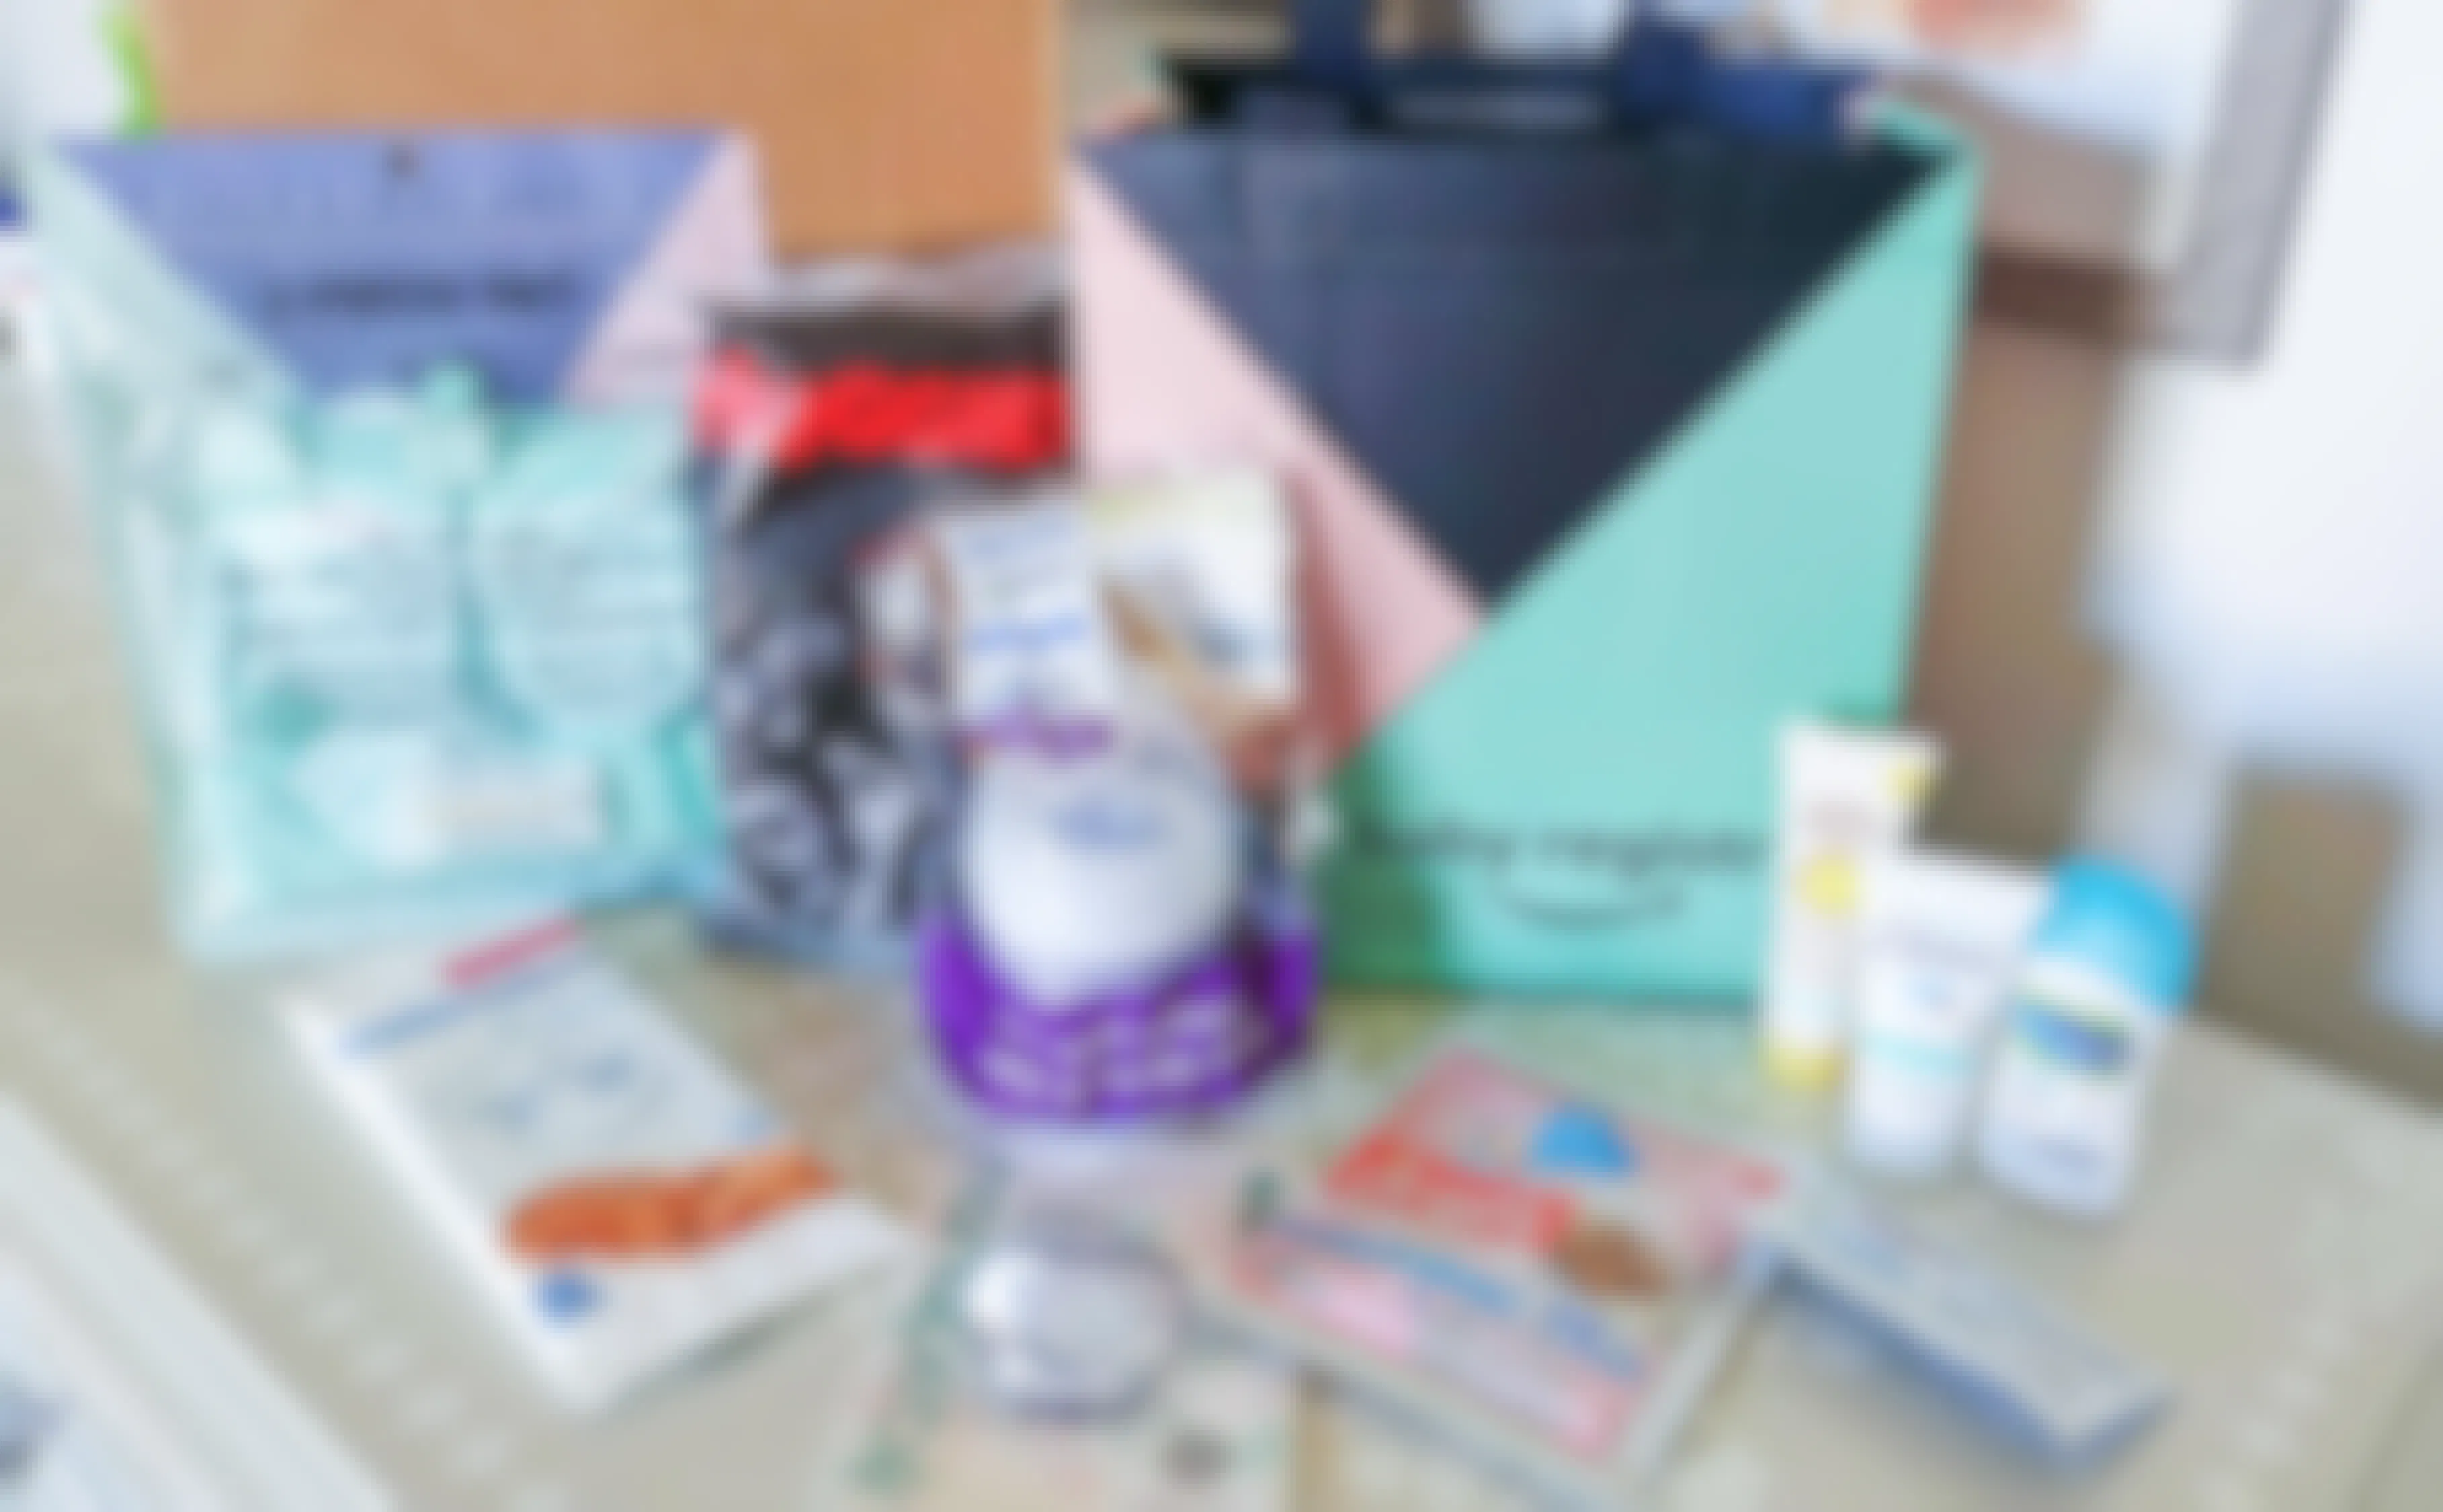 An Amazon Baby Registry reusable shopping bag sitting on a table surrounded with various baby products.